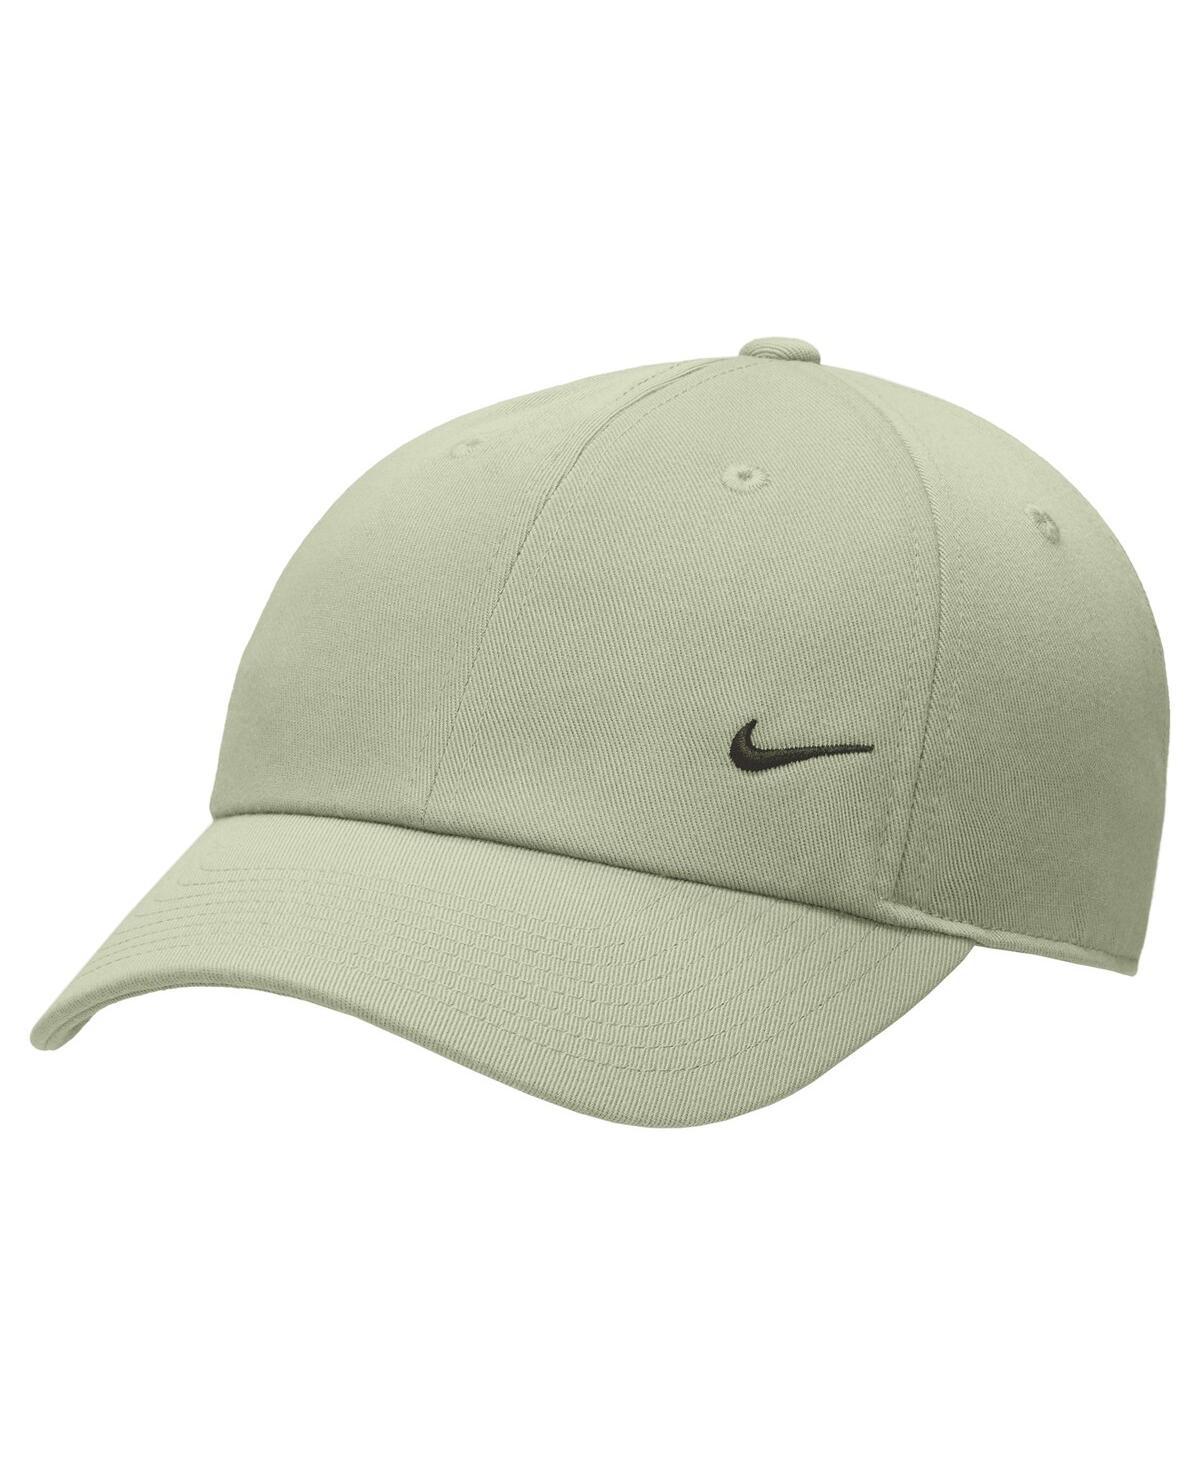 Men's and Women's Olive Swoosh Club Performance Adjustable Hat - Olive